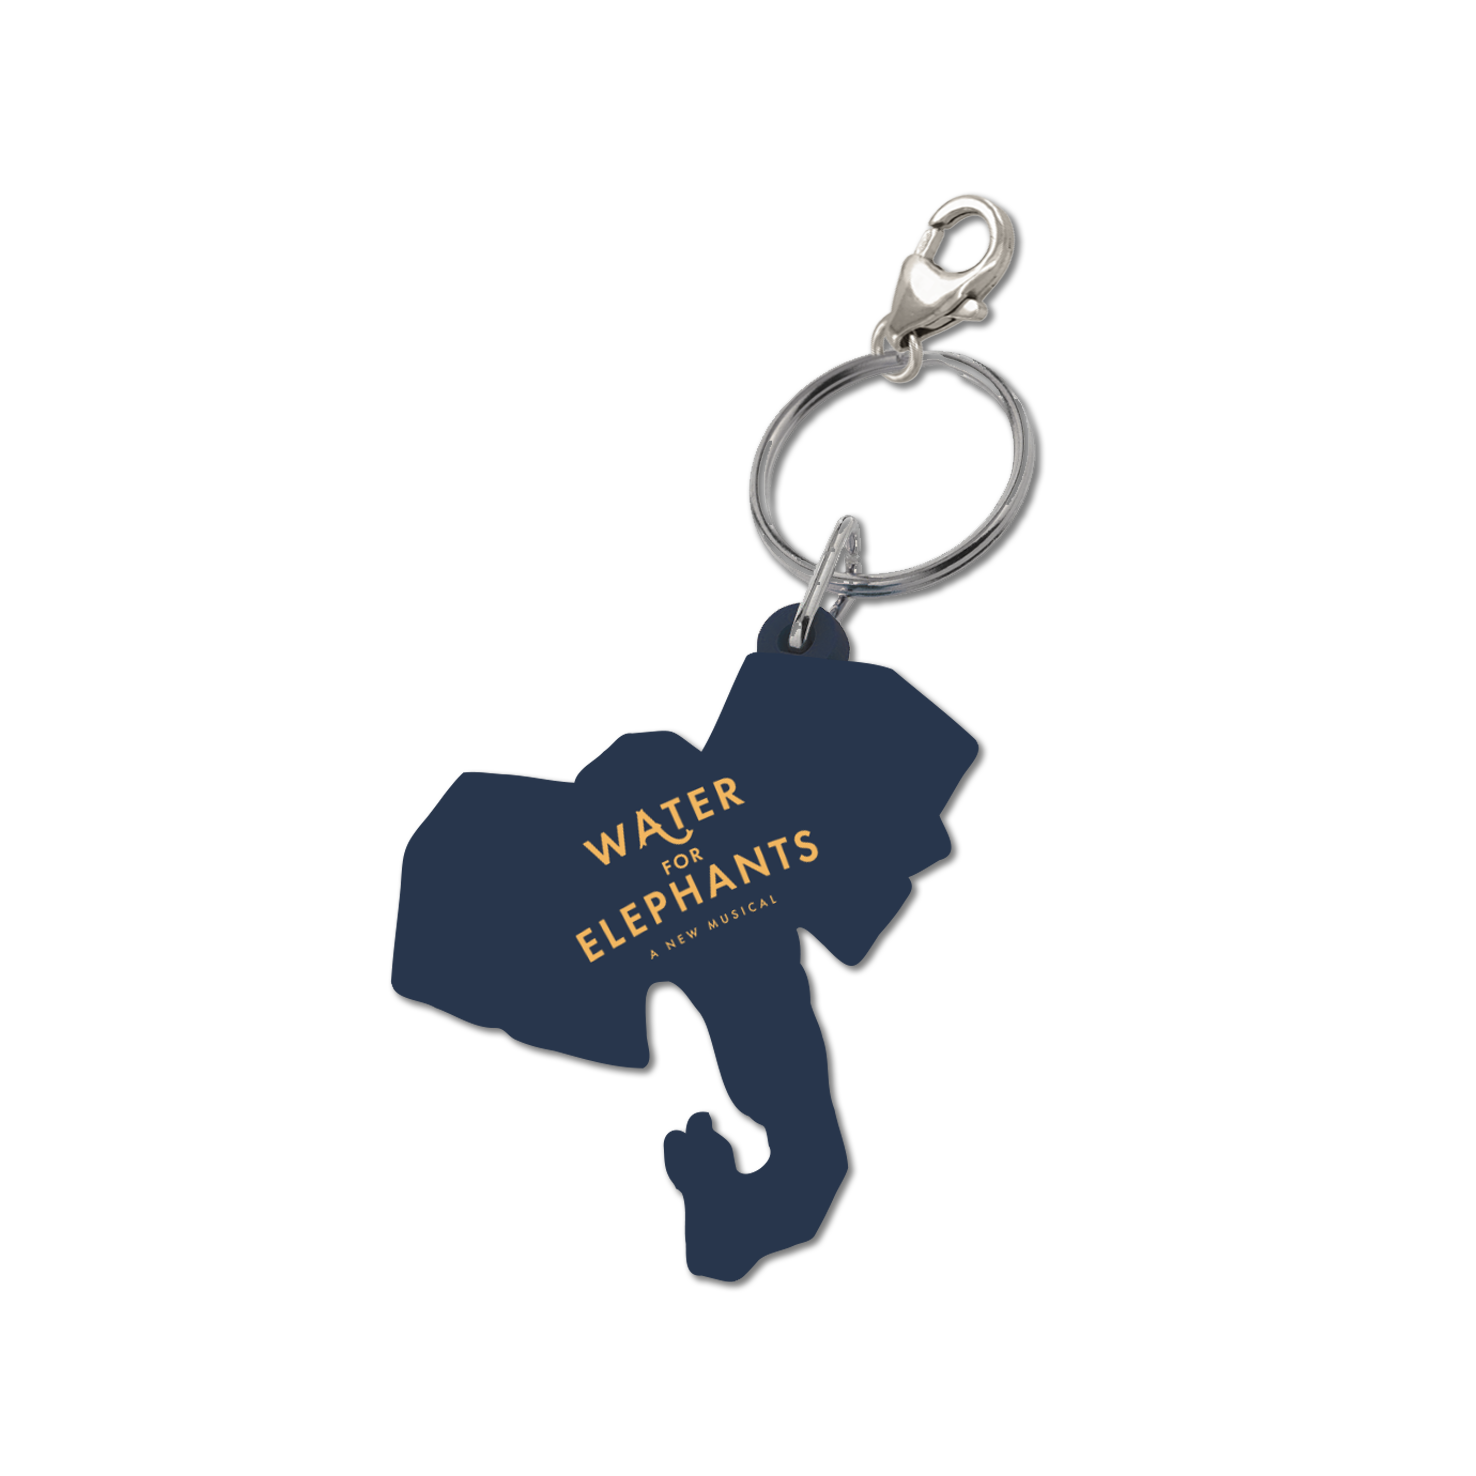 WATER FOR ELEPHANTS Rubber Keychain - Image 2